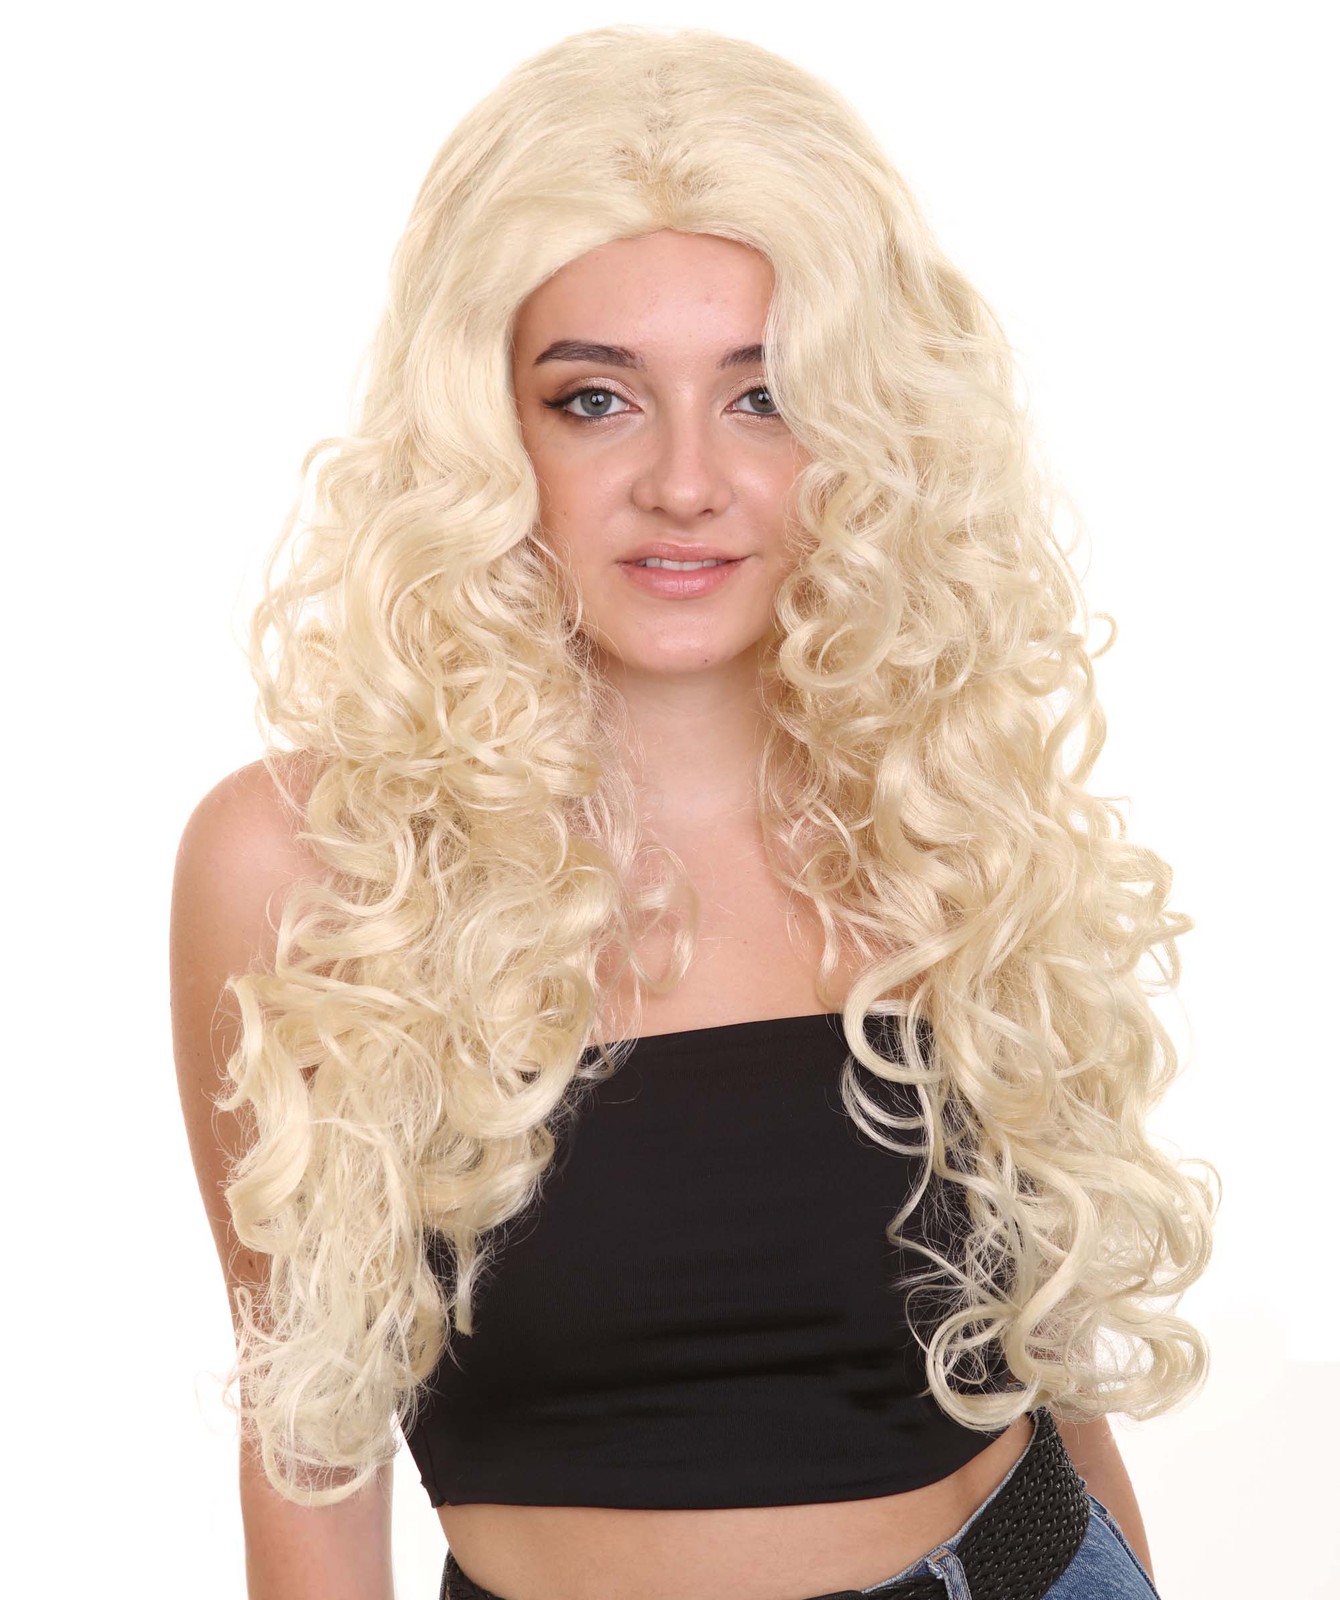 81s Disco Diva Women's Wig | Curly Long Cosplay Wig Multiple Colors